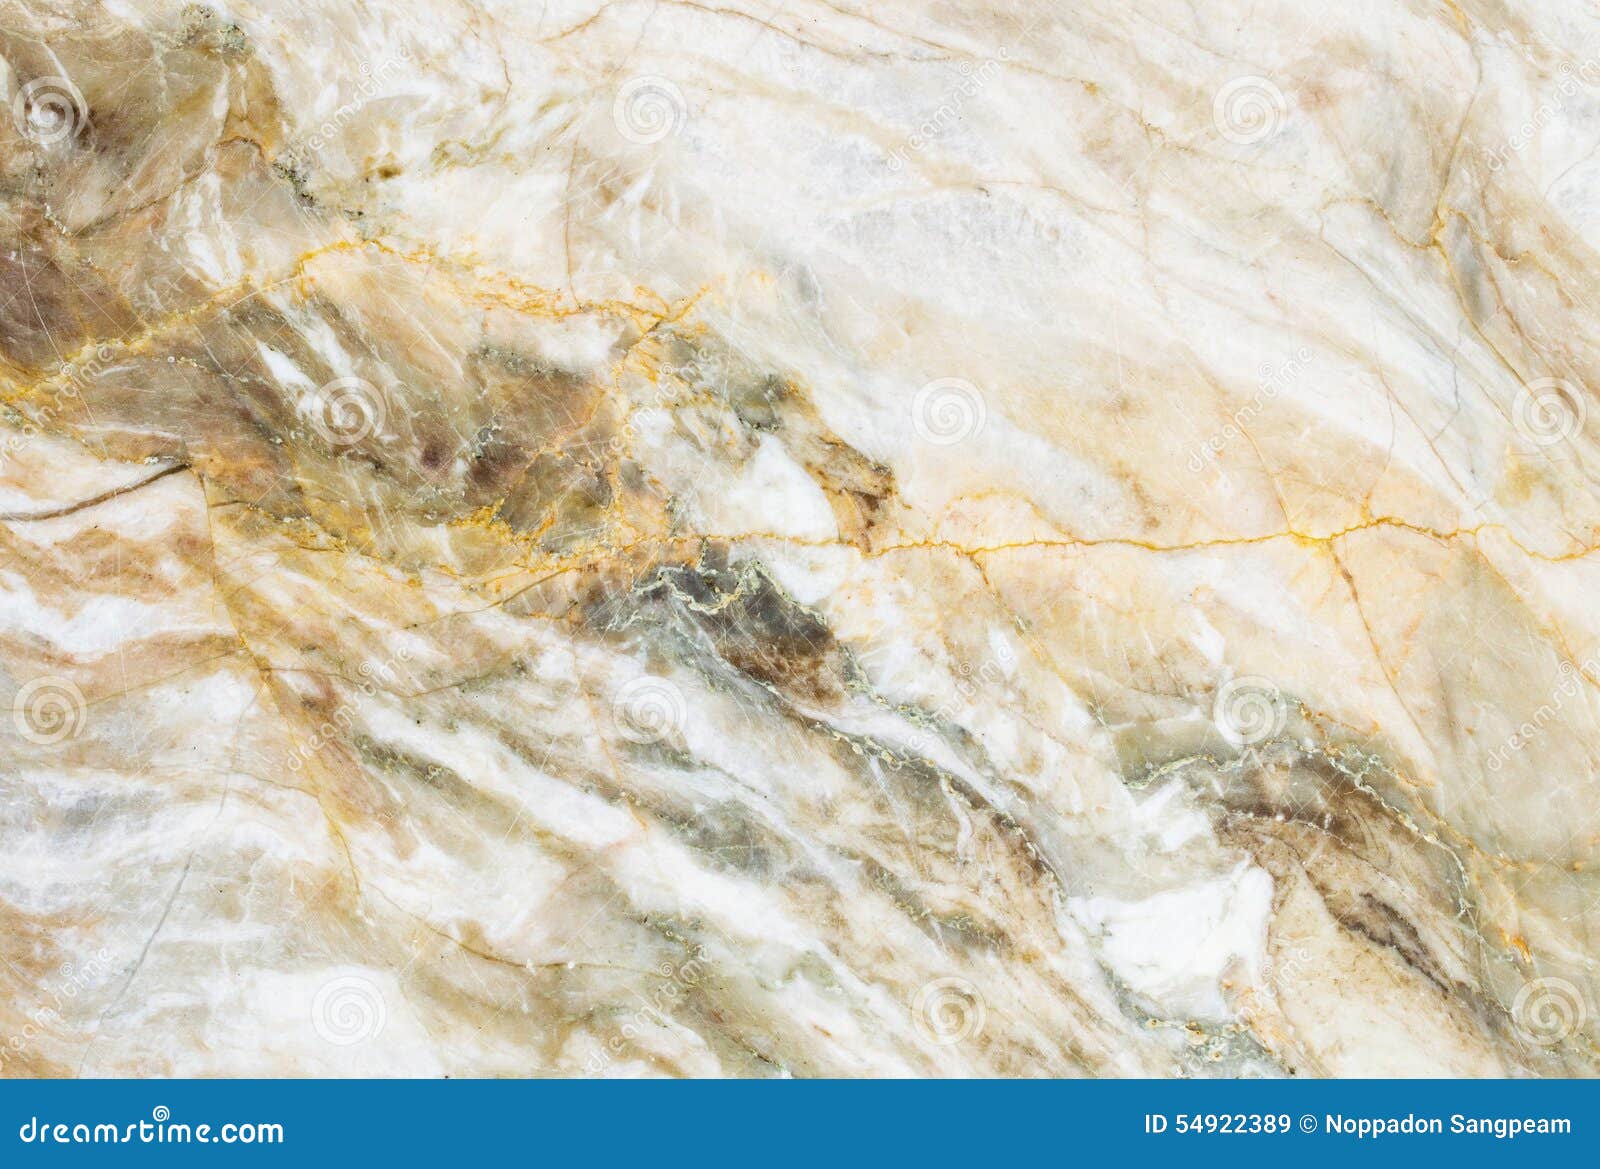 marble patterned texture background in natural patterned and color for  abstract marbles of thailand.